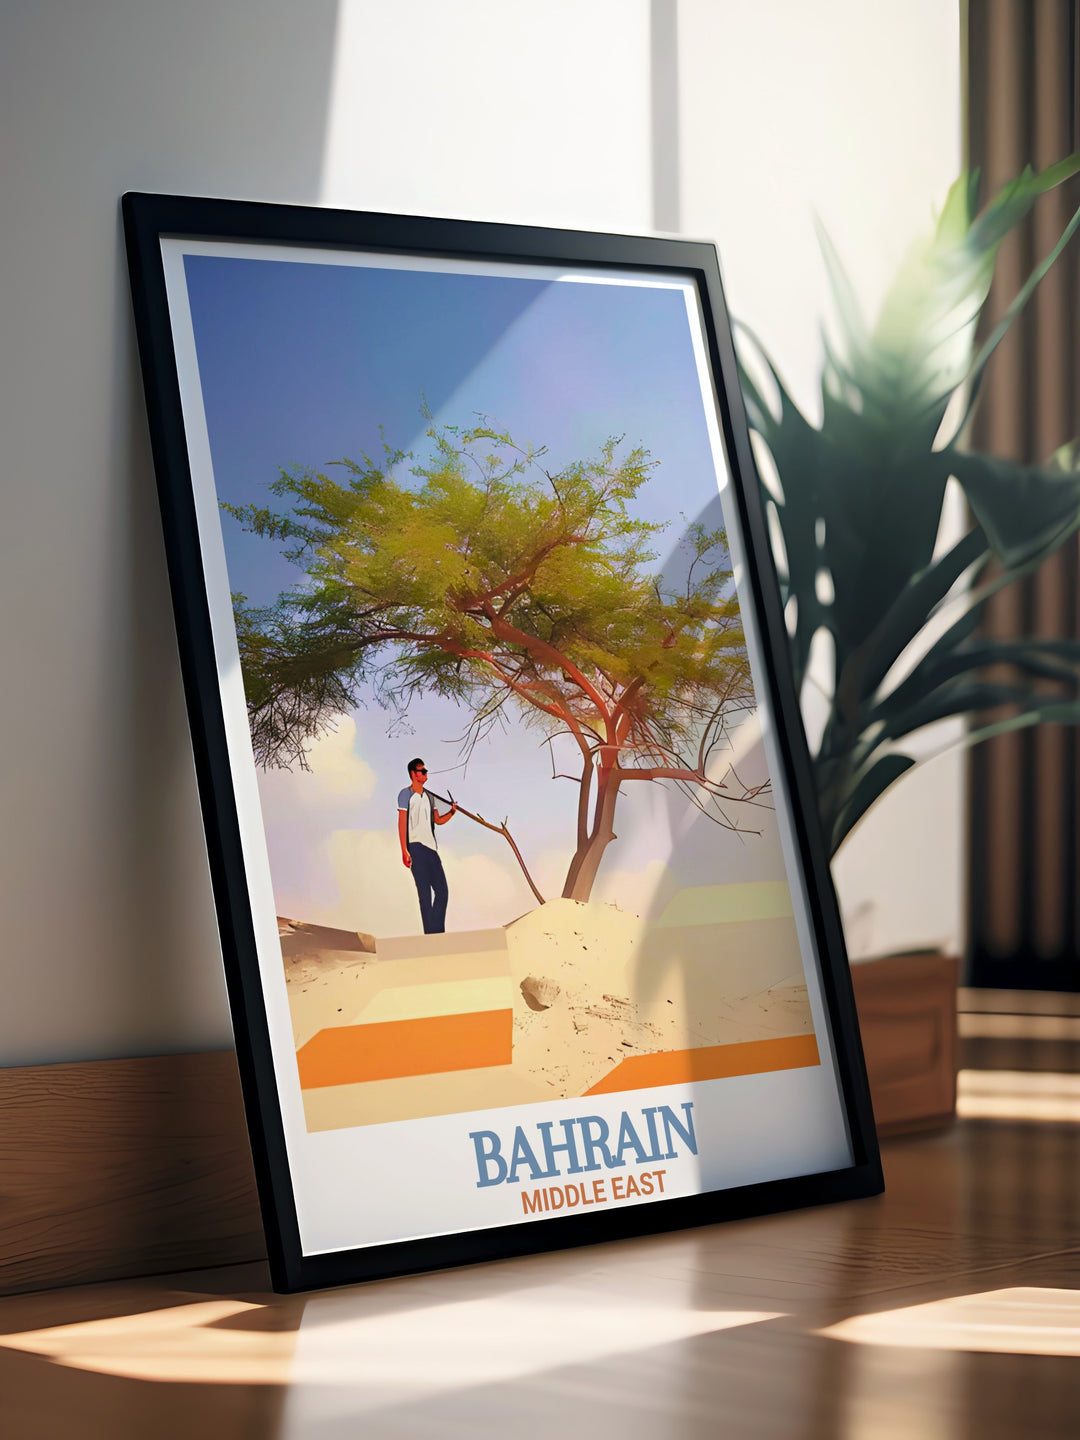 Stunning Bahrain Wall Art highlighting the Tree of Life against a backdrop of the desert perfect for travel enthusiasts and art lovers looking to add a touch of the Middle East to their space.